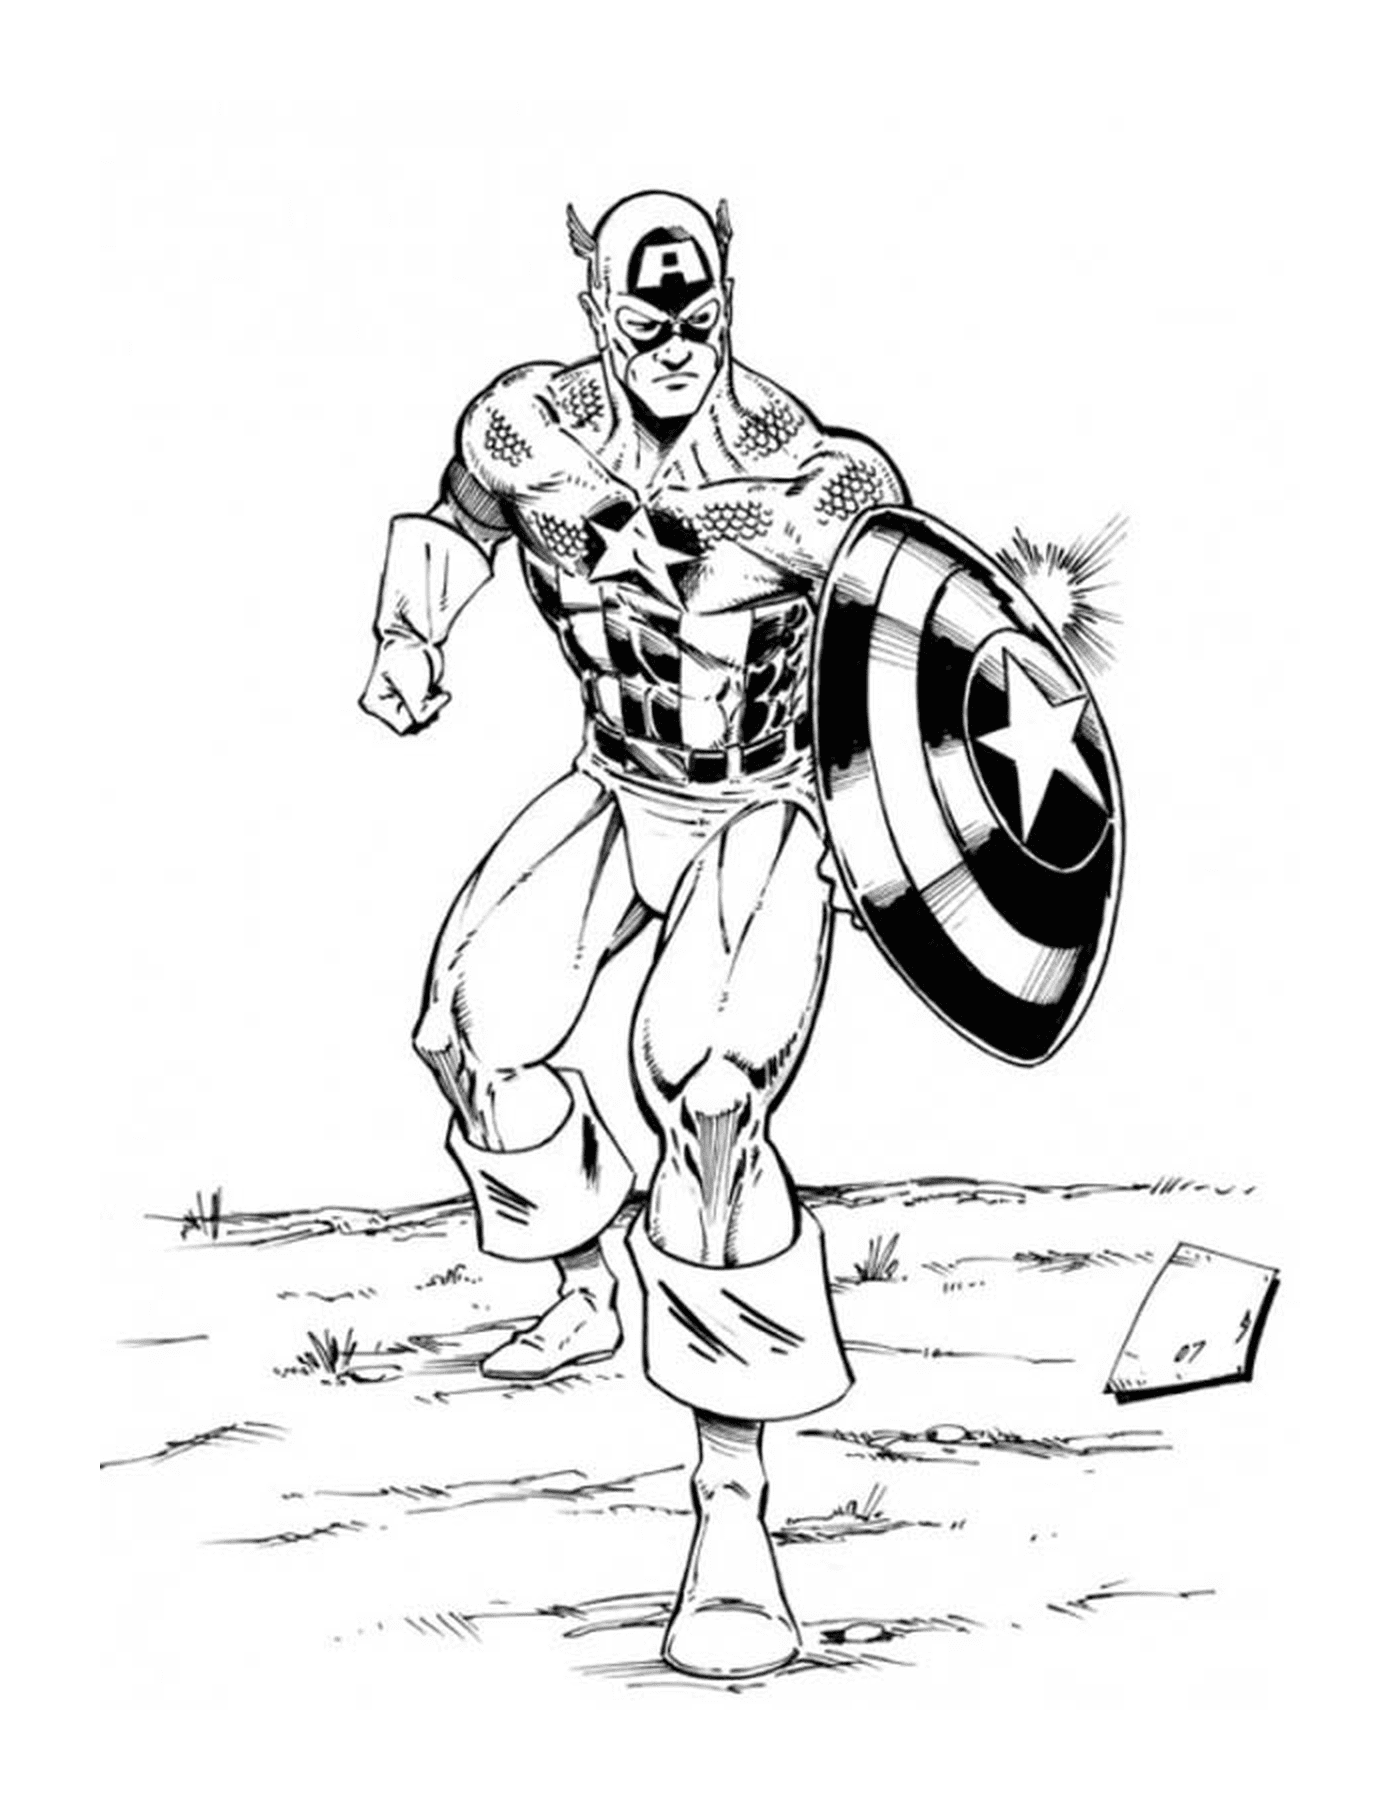  Image of a Captain America 